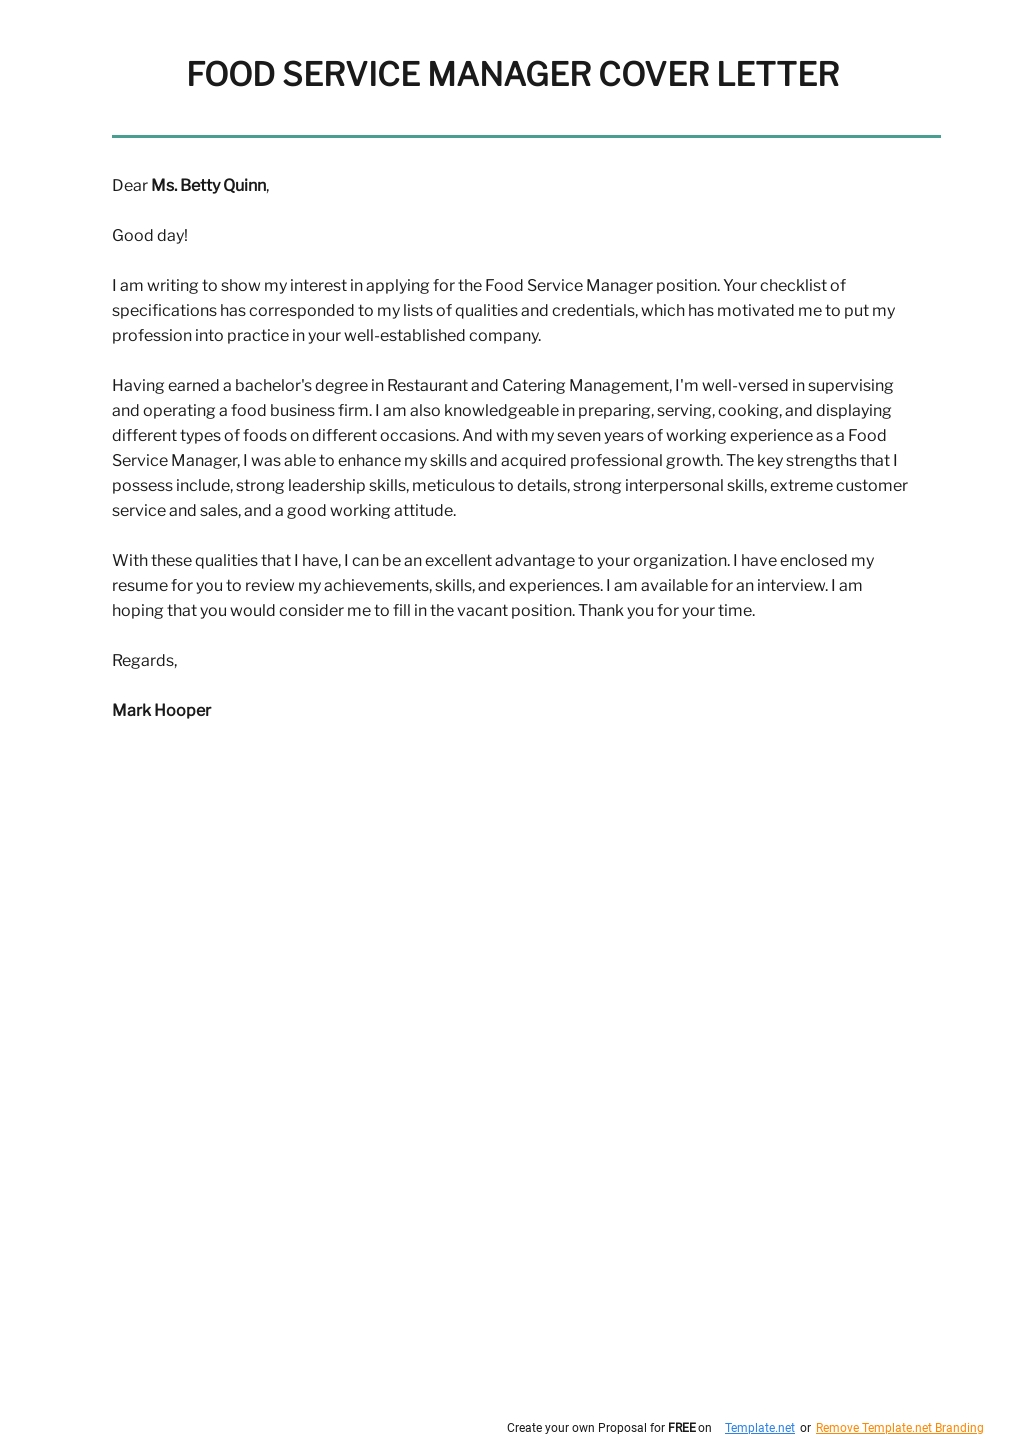 Free Food Service Manager Cover Letter Template.jpe